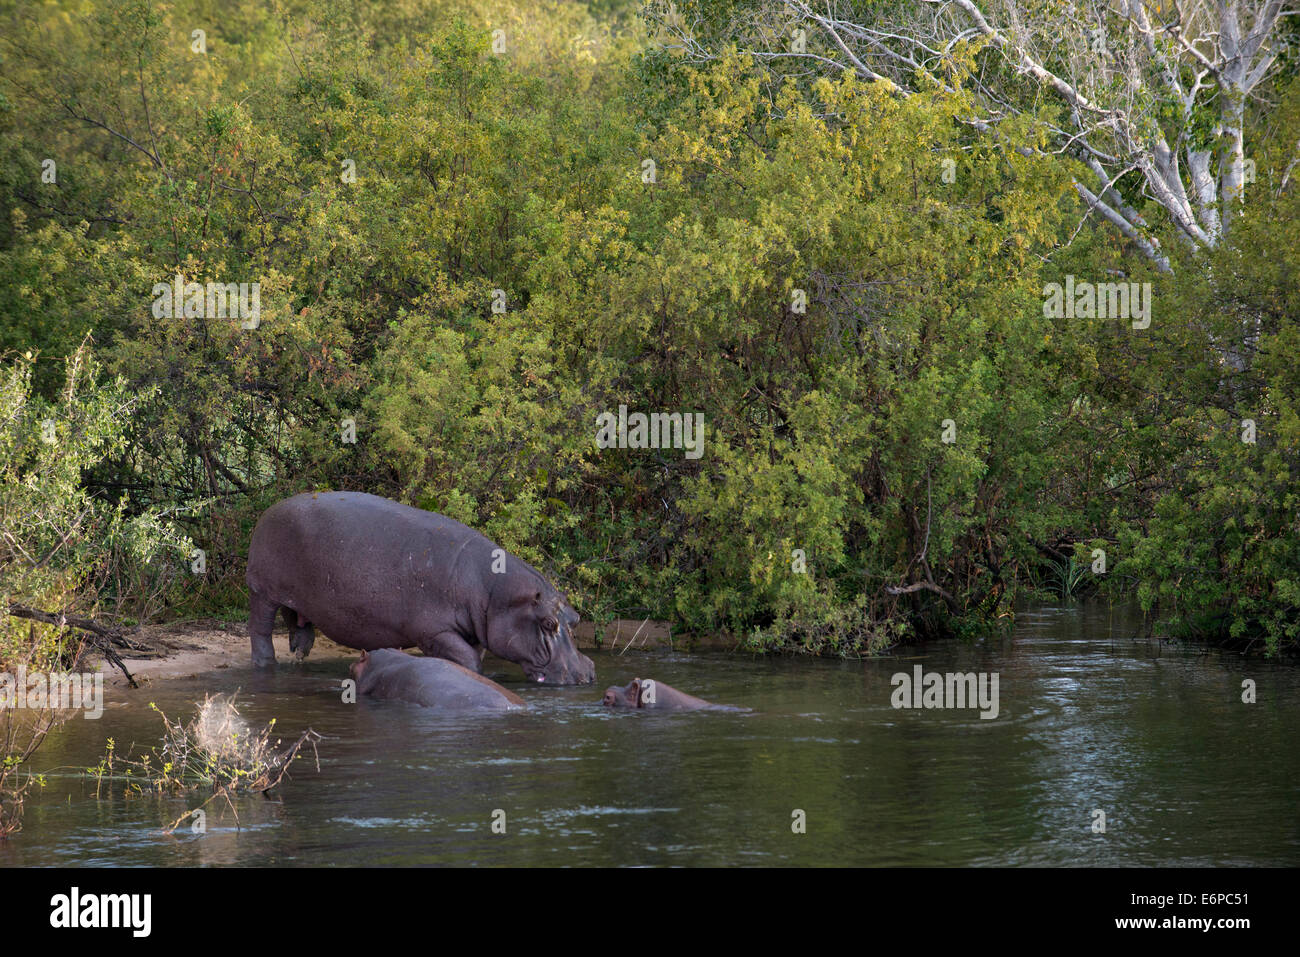 From Victoria Falls is possible to visit the nearby Botswana. Specifically Chobe National Park. Hippos in Chobe River. The Chobe Stock Photo